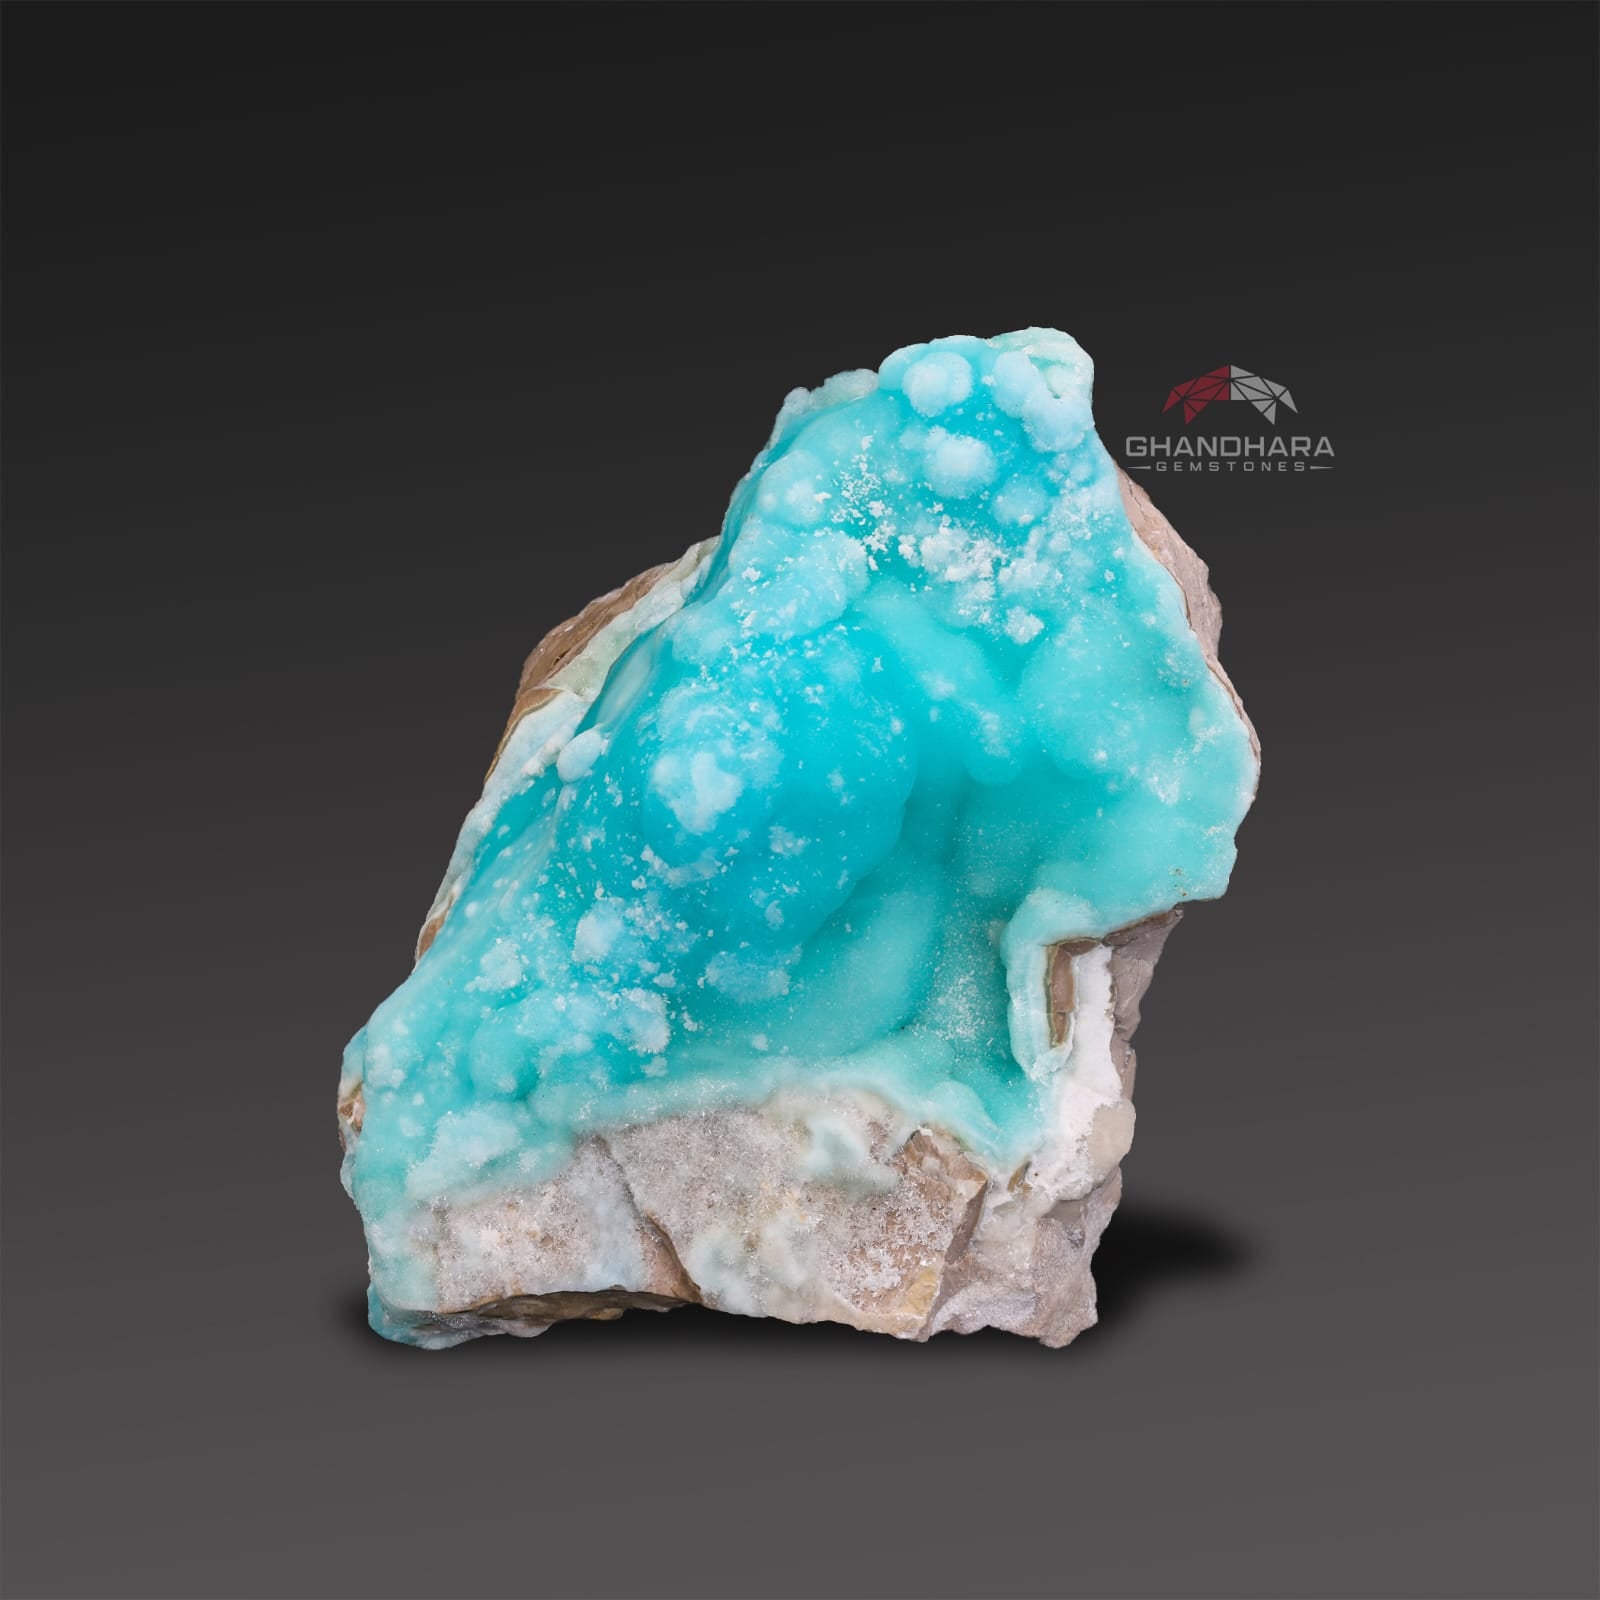 Lovely Botryoidal Seafoam Blue Aragonite with Droozy Luster